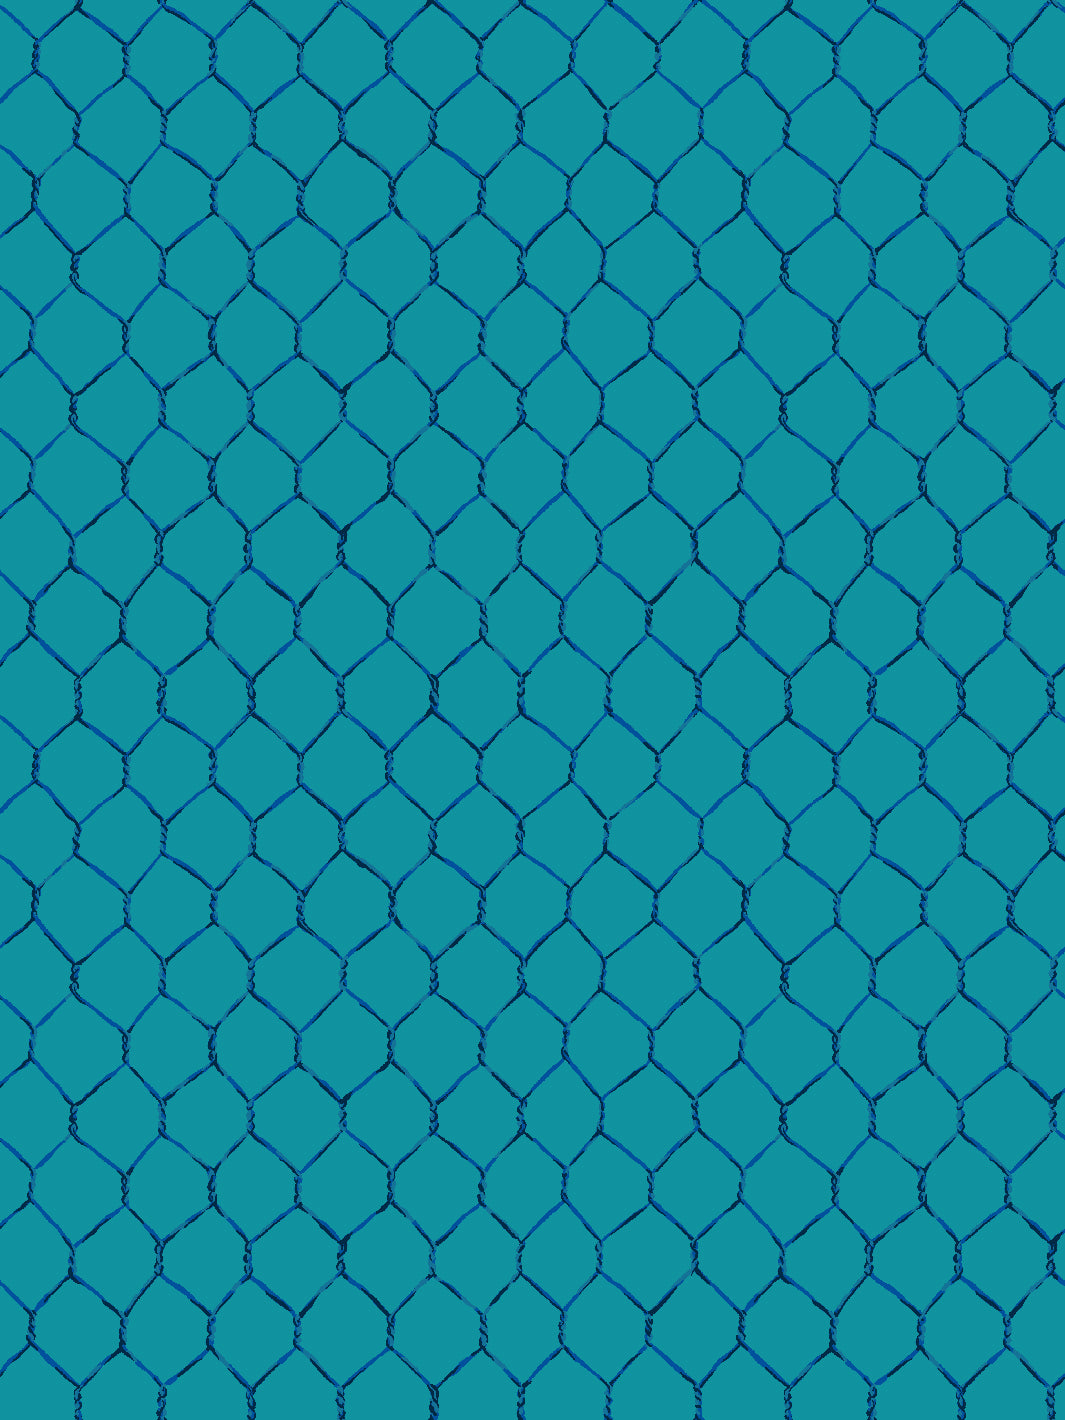 'Evelyn's Chicken Wire' Wallpaper by Sarah Jessica Parker - Sapphire on Peacock